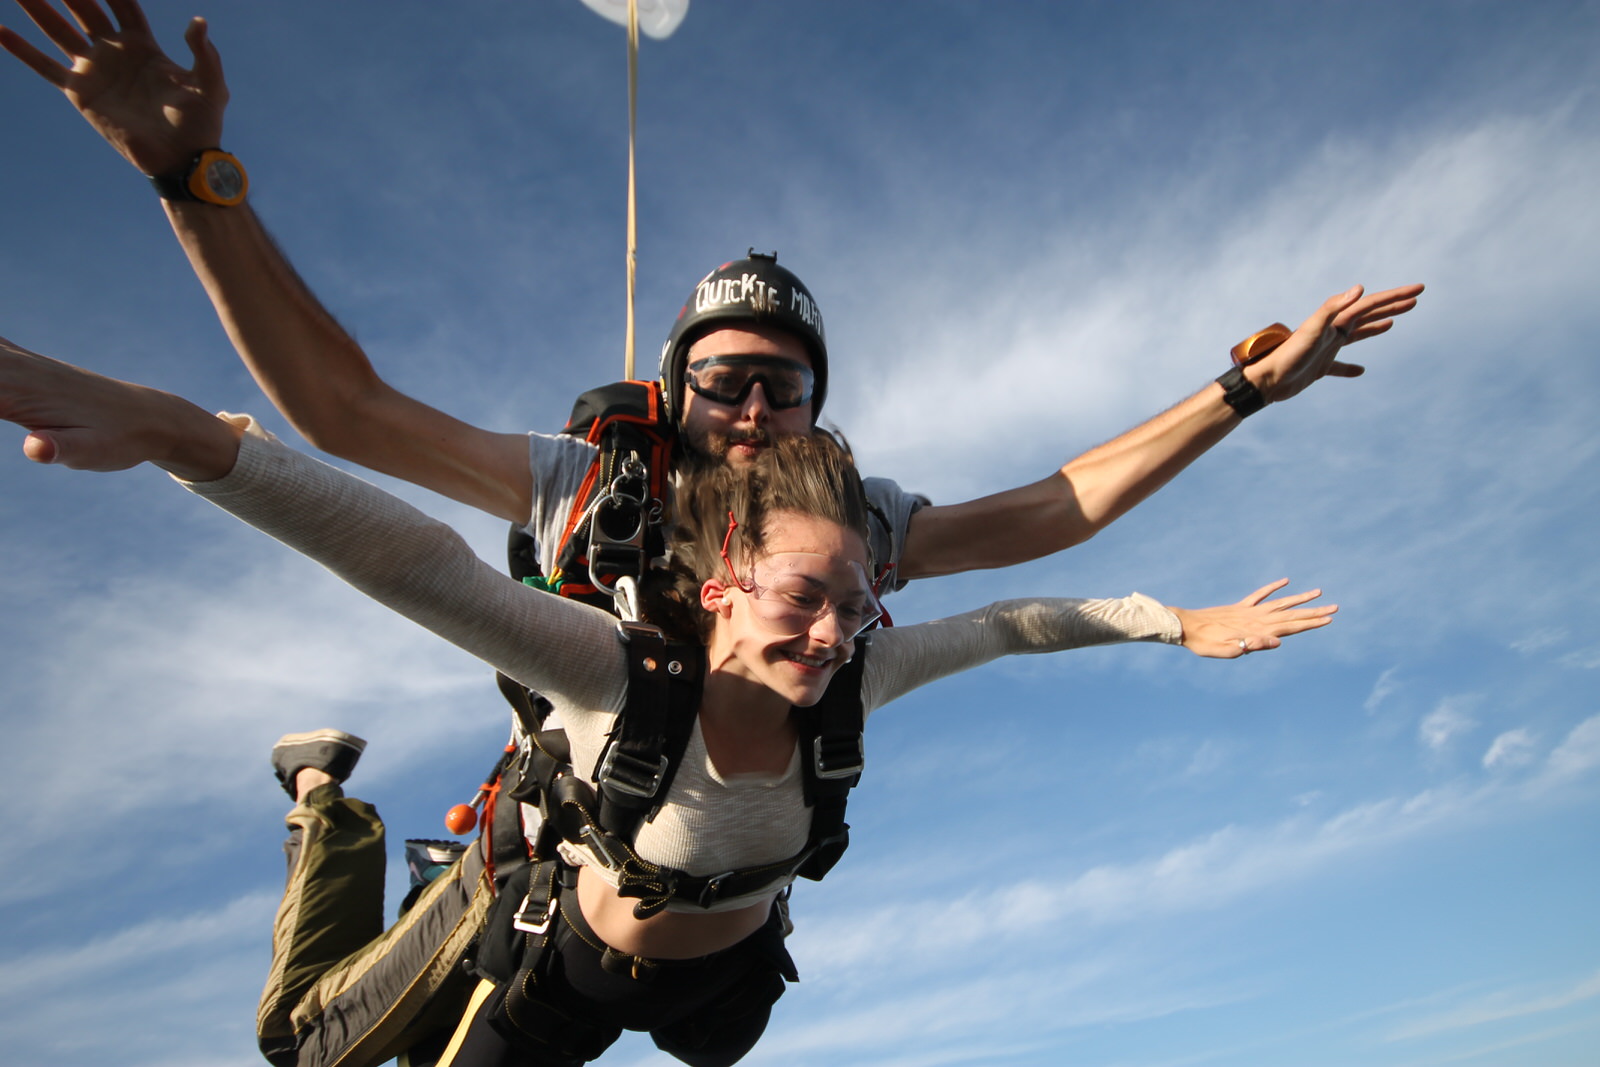 Does Your Stomach Drop When You Skydive? Oklahoma Skydiving